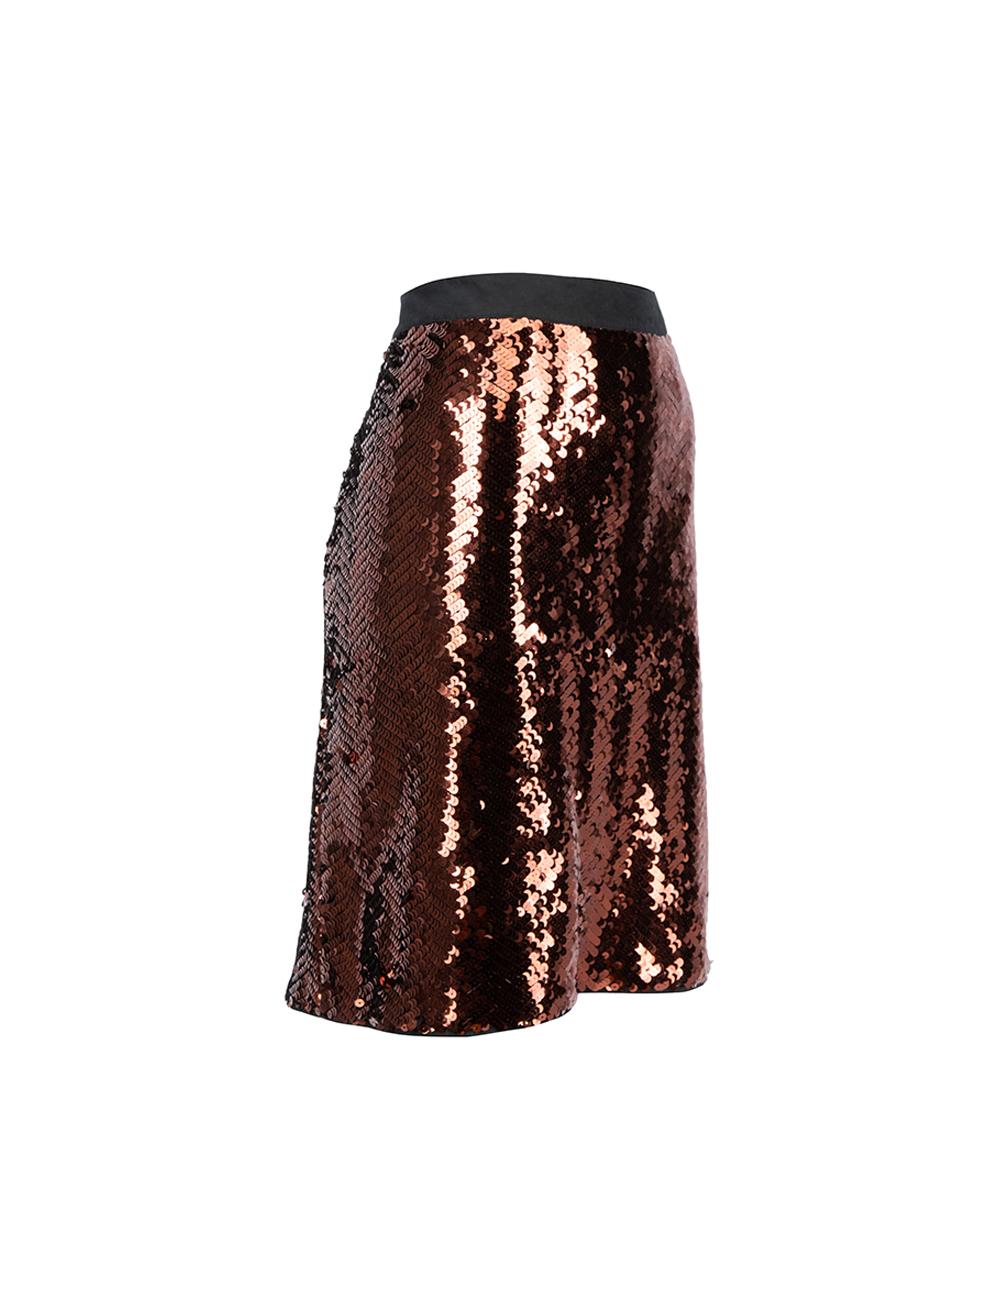 CONDITION is Very good. Hardly any visible wear to skirt is evident. There are few missing sequins on this used See by Chloé designer resale item. 
 
 Details
  Bronze
 Synthetic
 Mini skirt
 Sequinned
 Side zip closure with button
 
 
 Made in